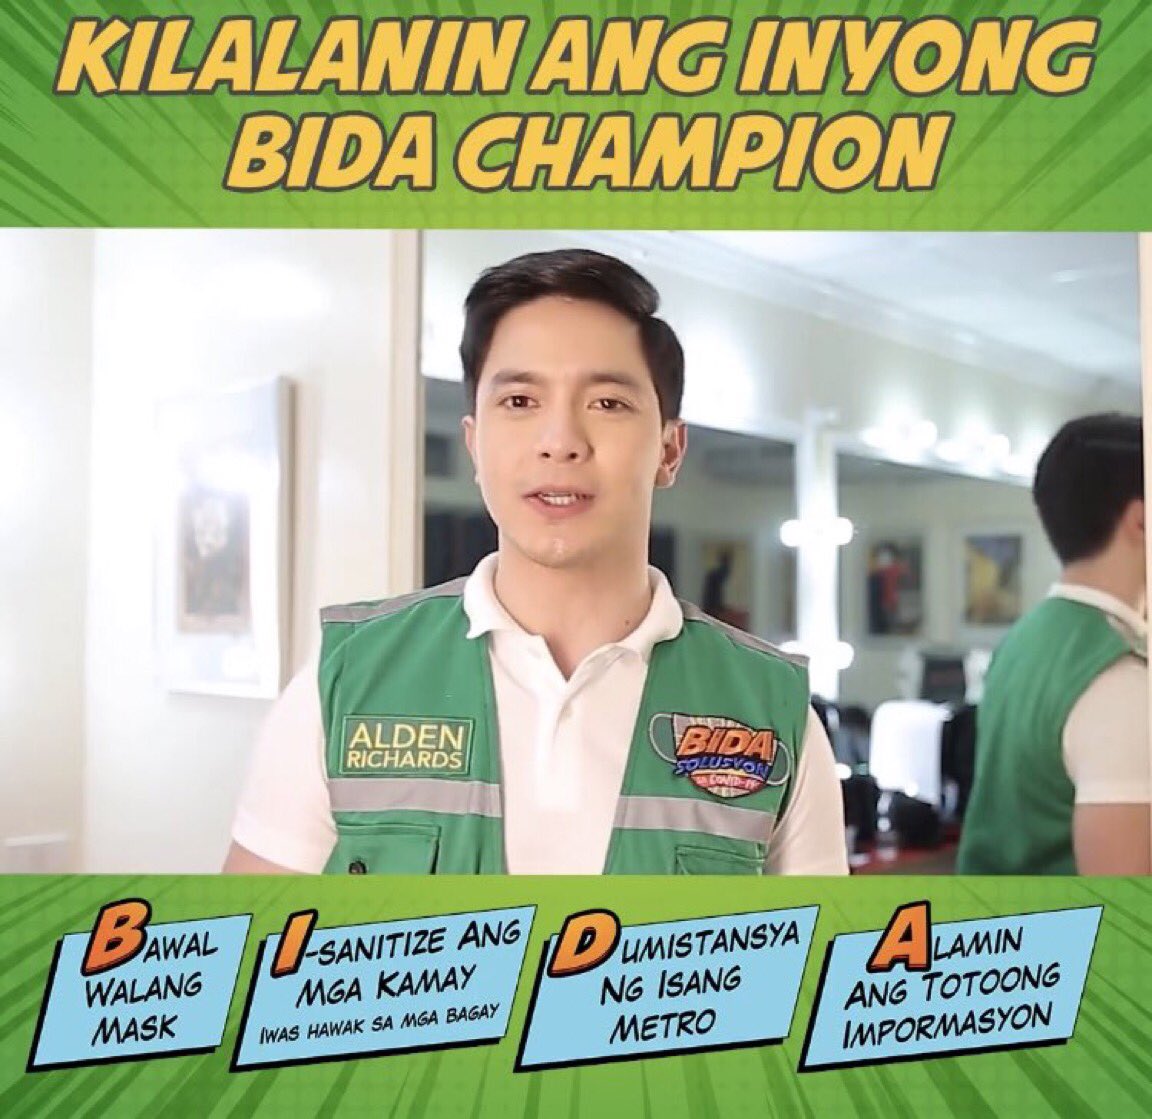 Very informative ang #BIDAsolusyon  Campaign launch.Mukhang simple pero malawak ang layunin. @DOHgovph  @usaid_manila @DILGPhilippines need all d help they can get 2 instill behavioral &mindset change sa mga Pilipino. Pero we need it to survive this COV19 scourge.
 #AldenRichards